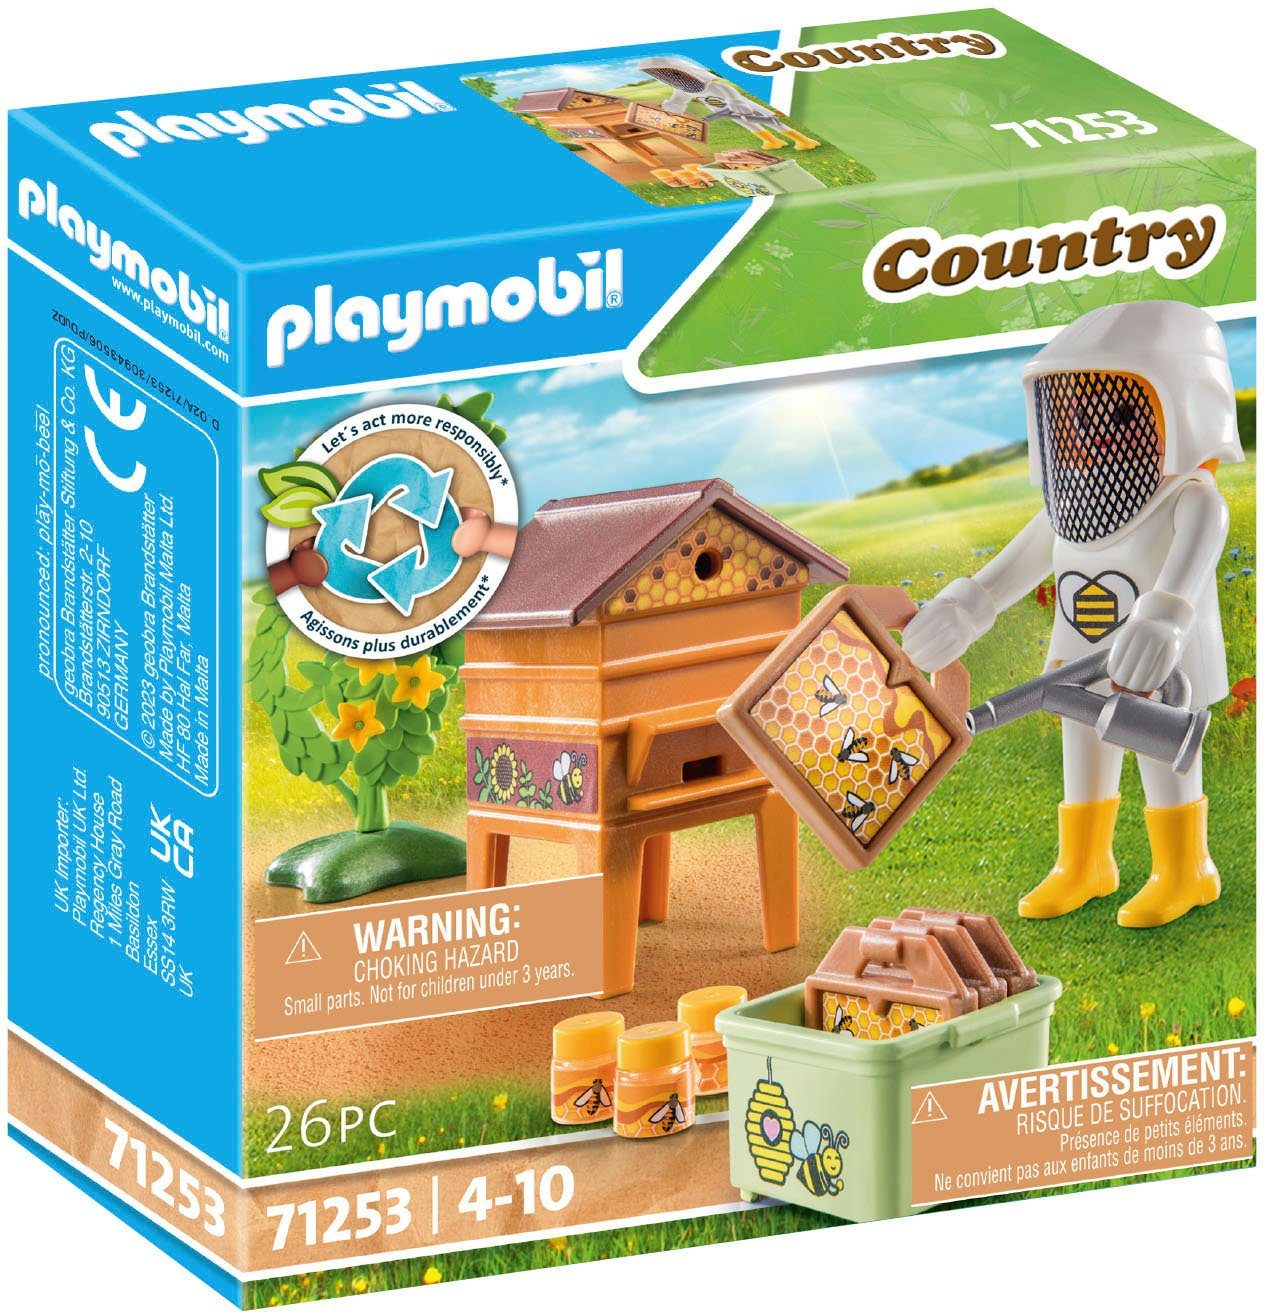 teilweise Playmobil® in aus (71253), Country, Europe Material; Made Imkerin Konstruktions-Spielset recyceltem